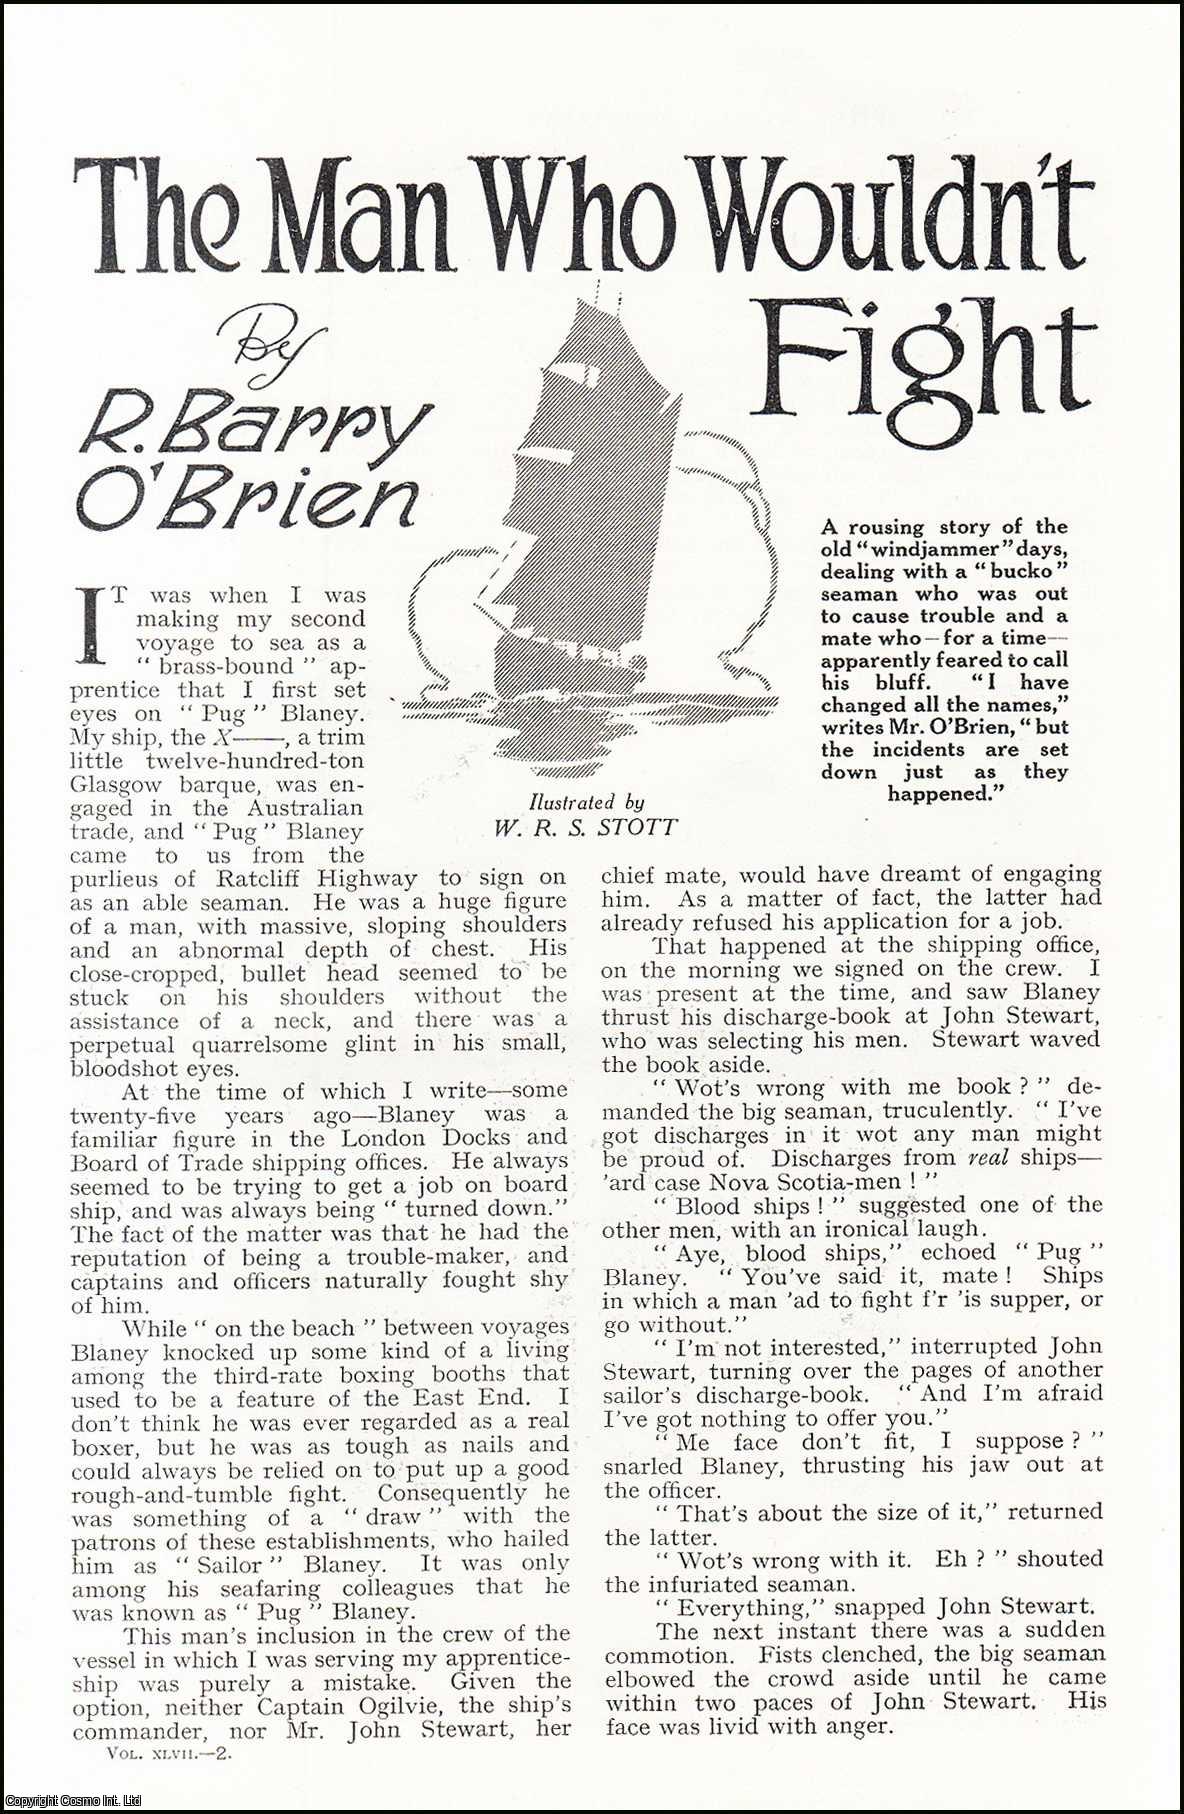 R. Barry O'Brien, illustrated by W.R.S. Stott. - The Man who wouldn't Fight : a story of a seaman out to cause trouble. An uncommon original article from the Wide World Magazine, 1931.